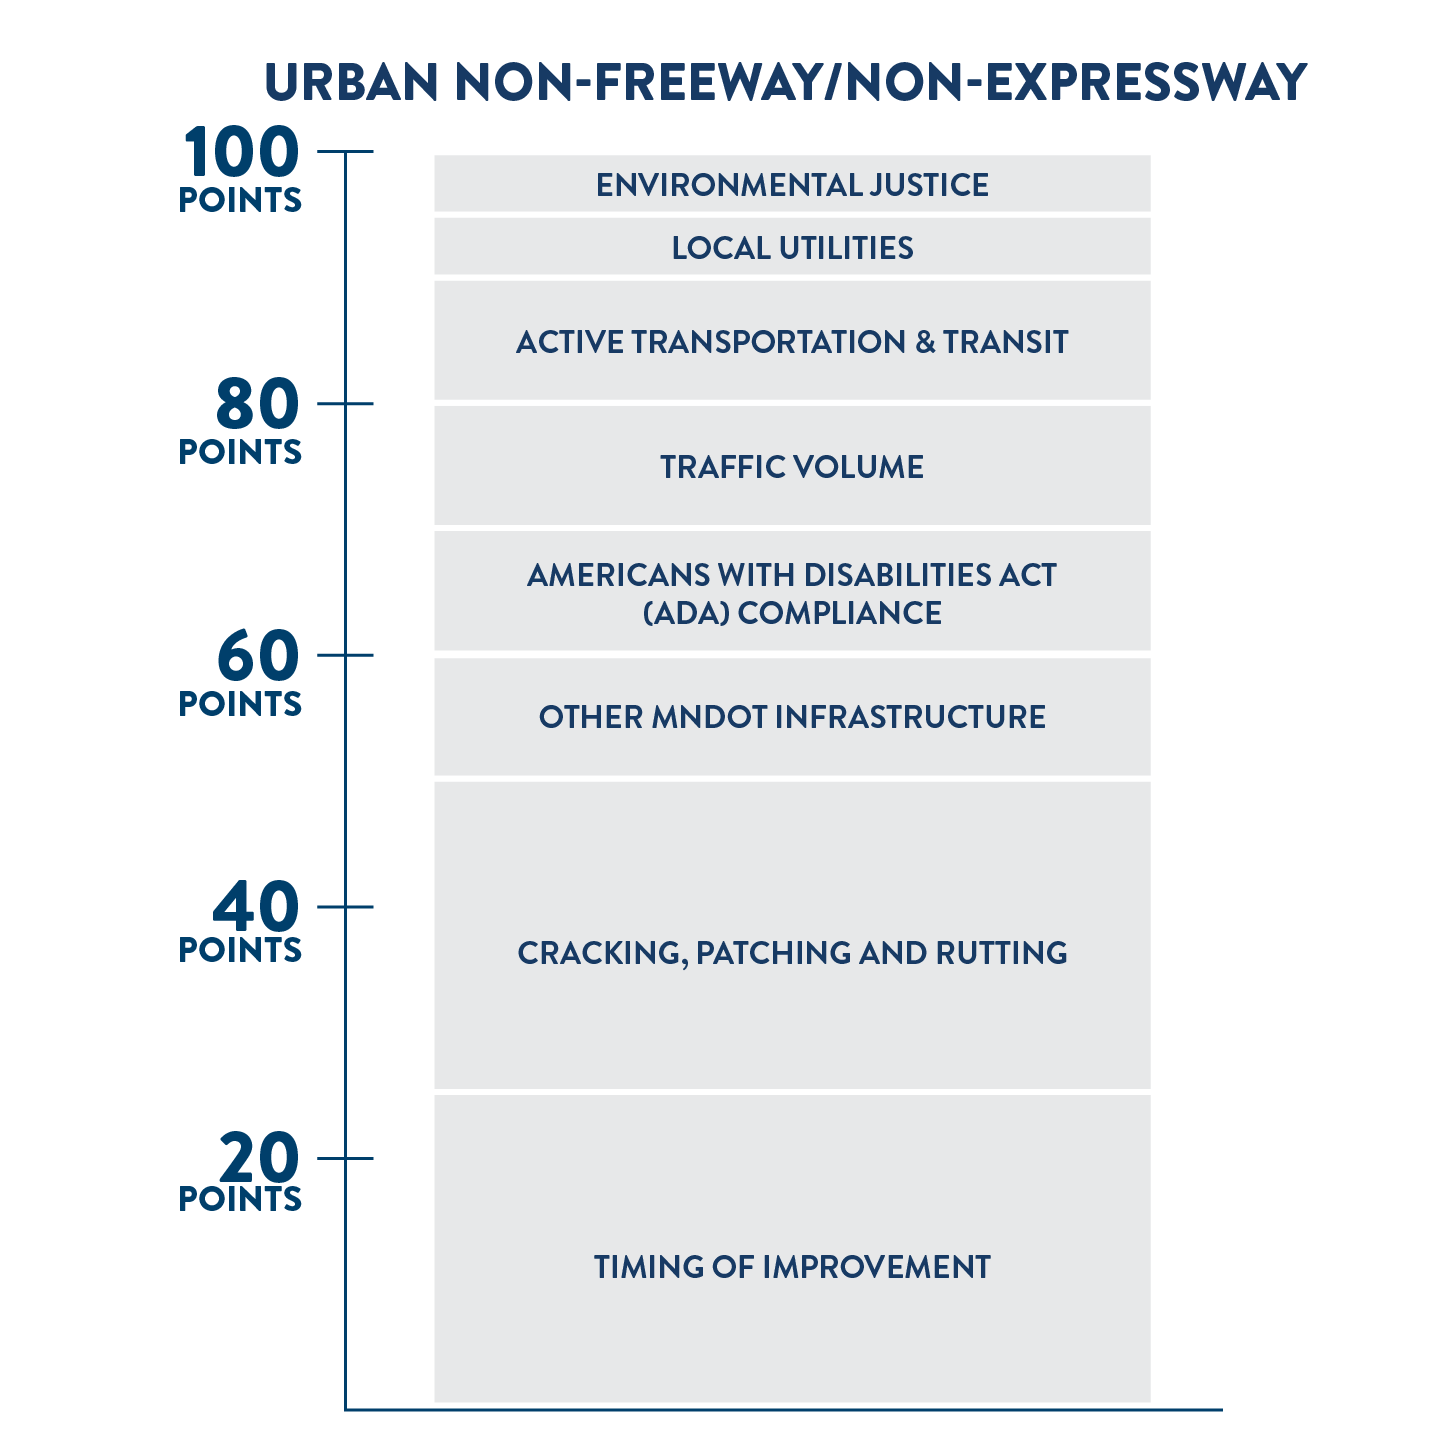 Scoring criteria for urban non-freeway, non-expressway pavement projects. Out of 100 possible points, 25 points are based on the timing of the improvement, 25 points are based on cracking, rutting and patching, 10 points are based on traffic volume, 10 points are based on compliance with the Americans with Disability Act, 10 points are based on active transportation and transit, 10 points are based on other infrastructure needs, 5 points are based on the condition of local utilities under the road, and 5 points are based on whether the project will benefit an environmental justice population.